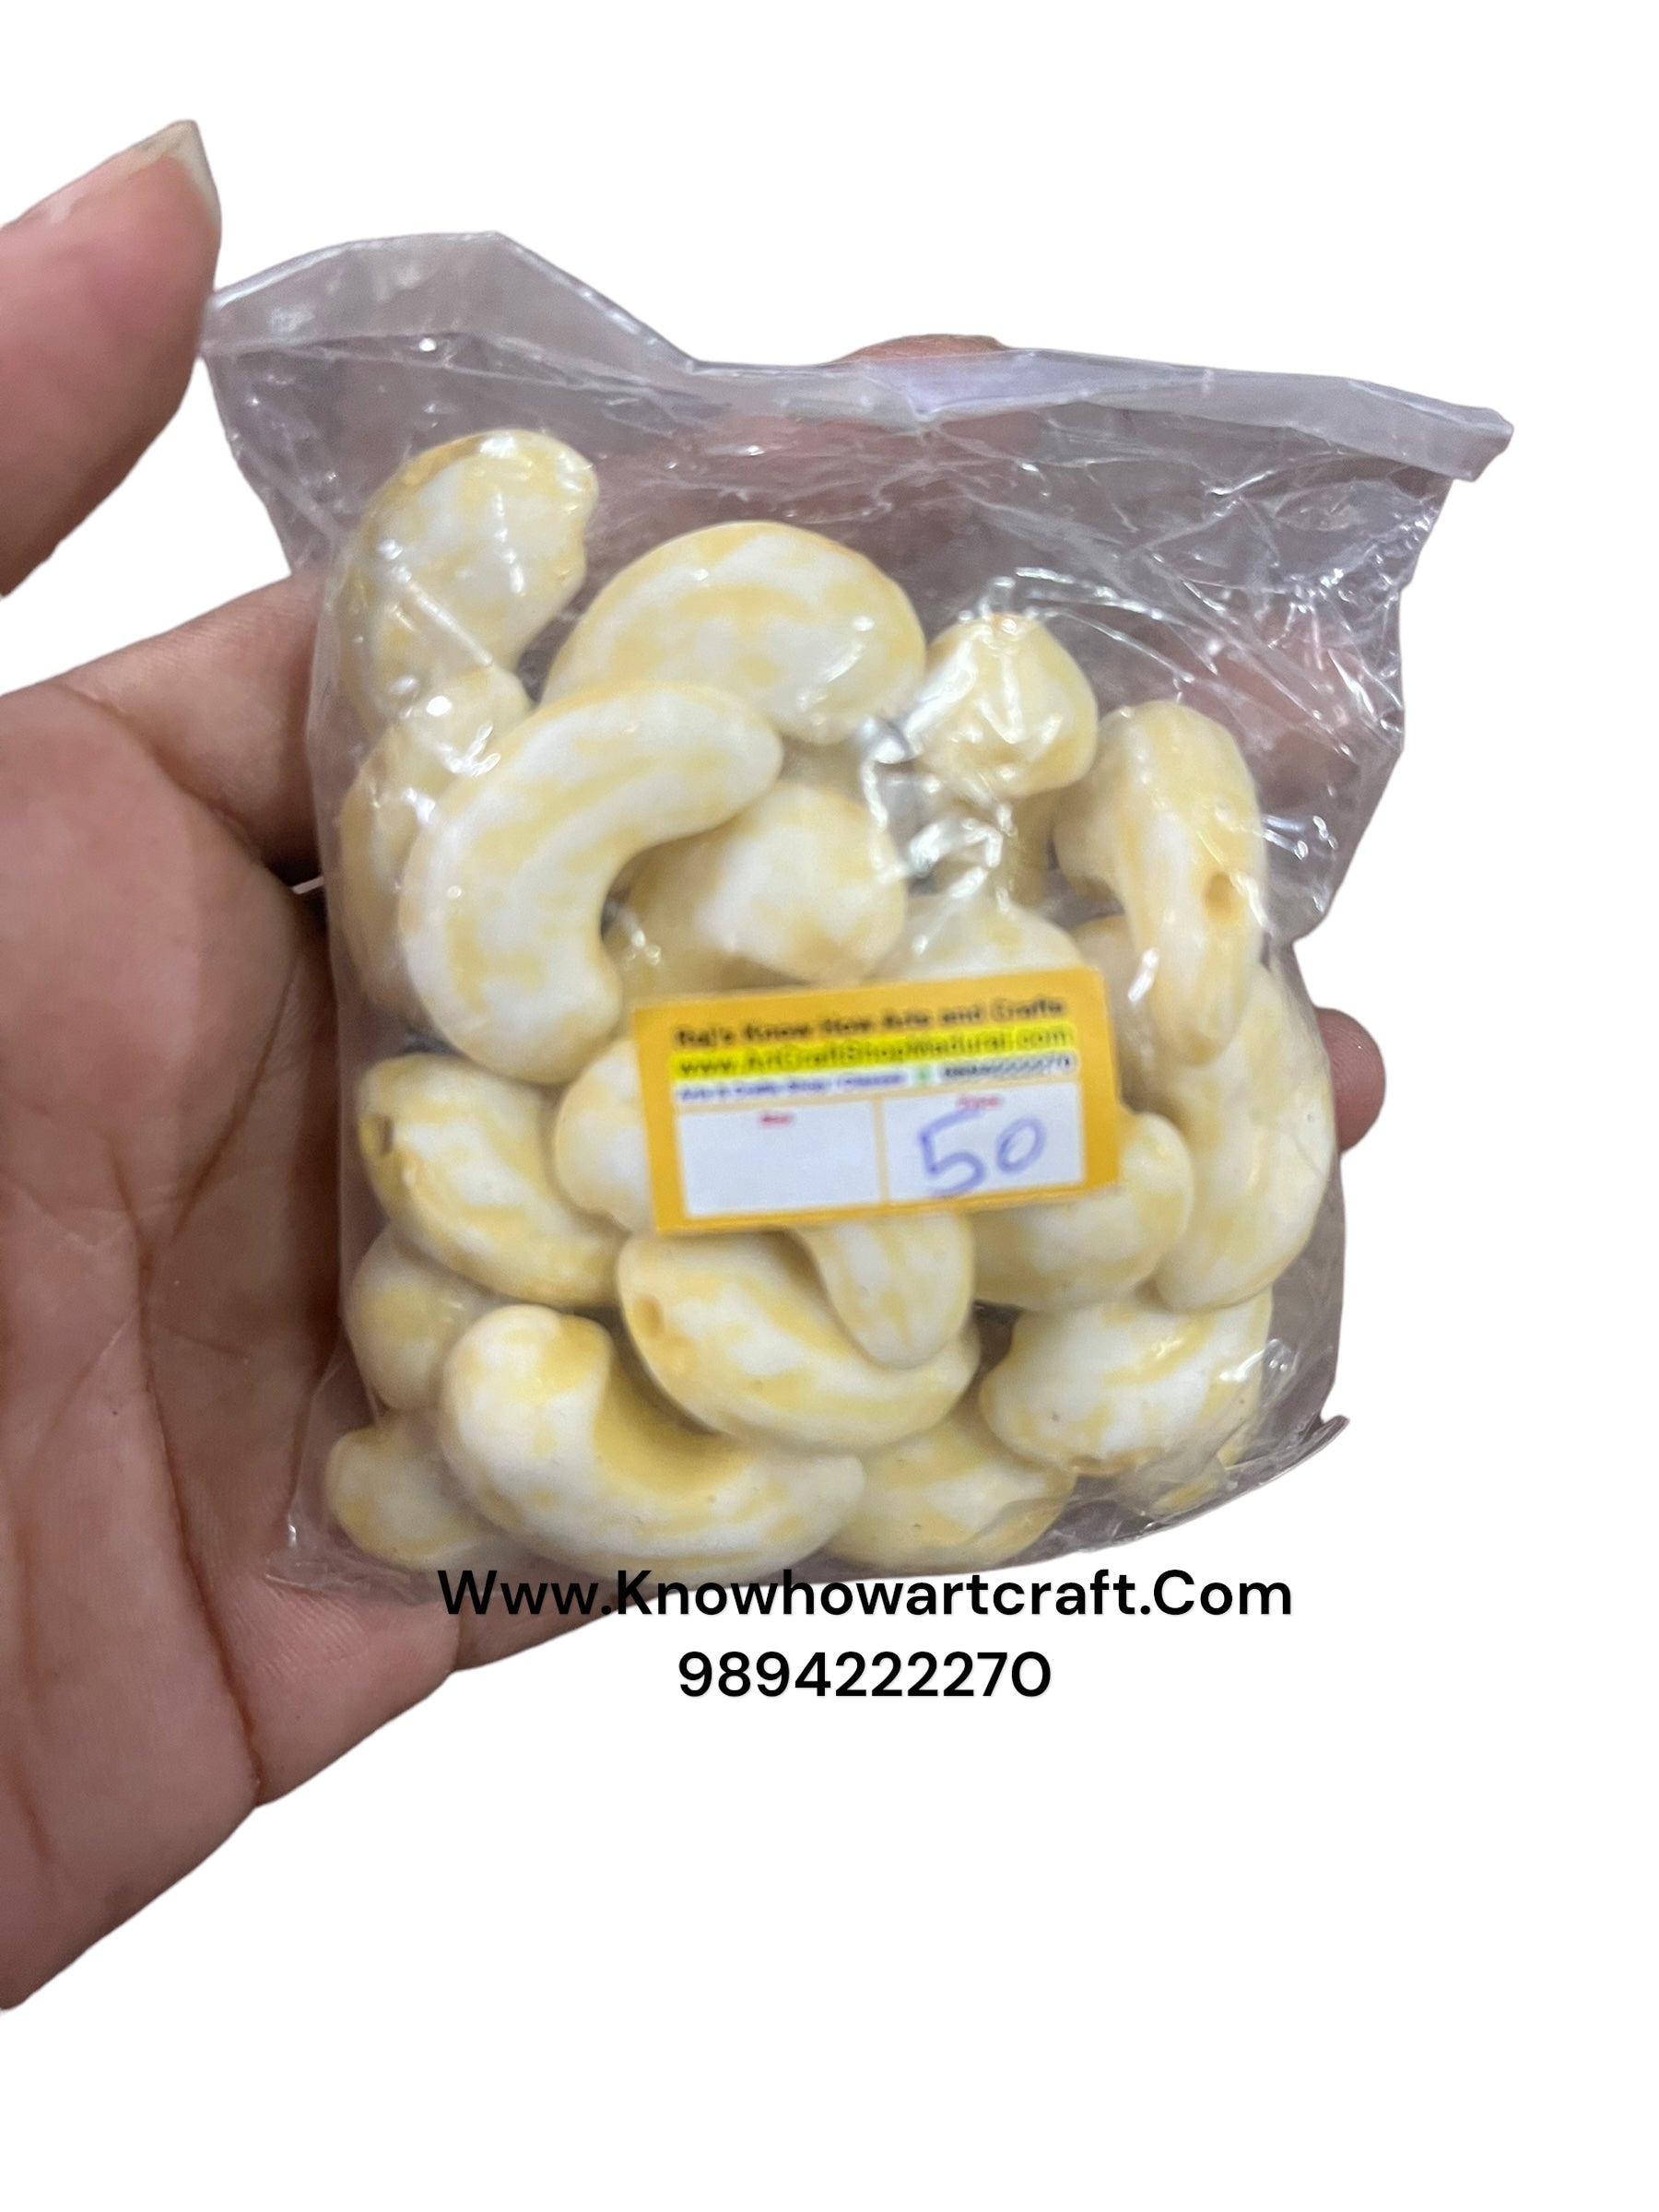 Cashew beads 50g in a pack